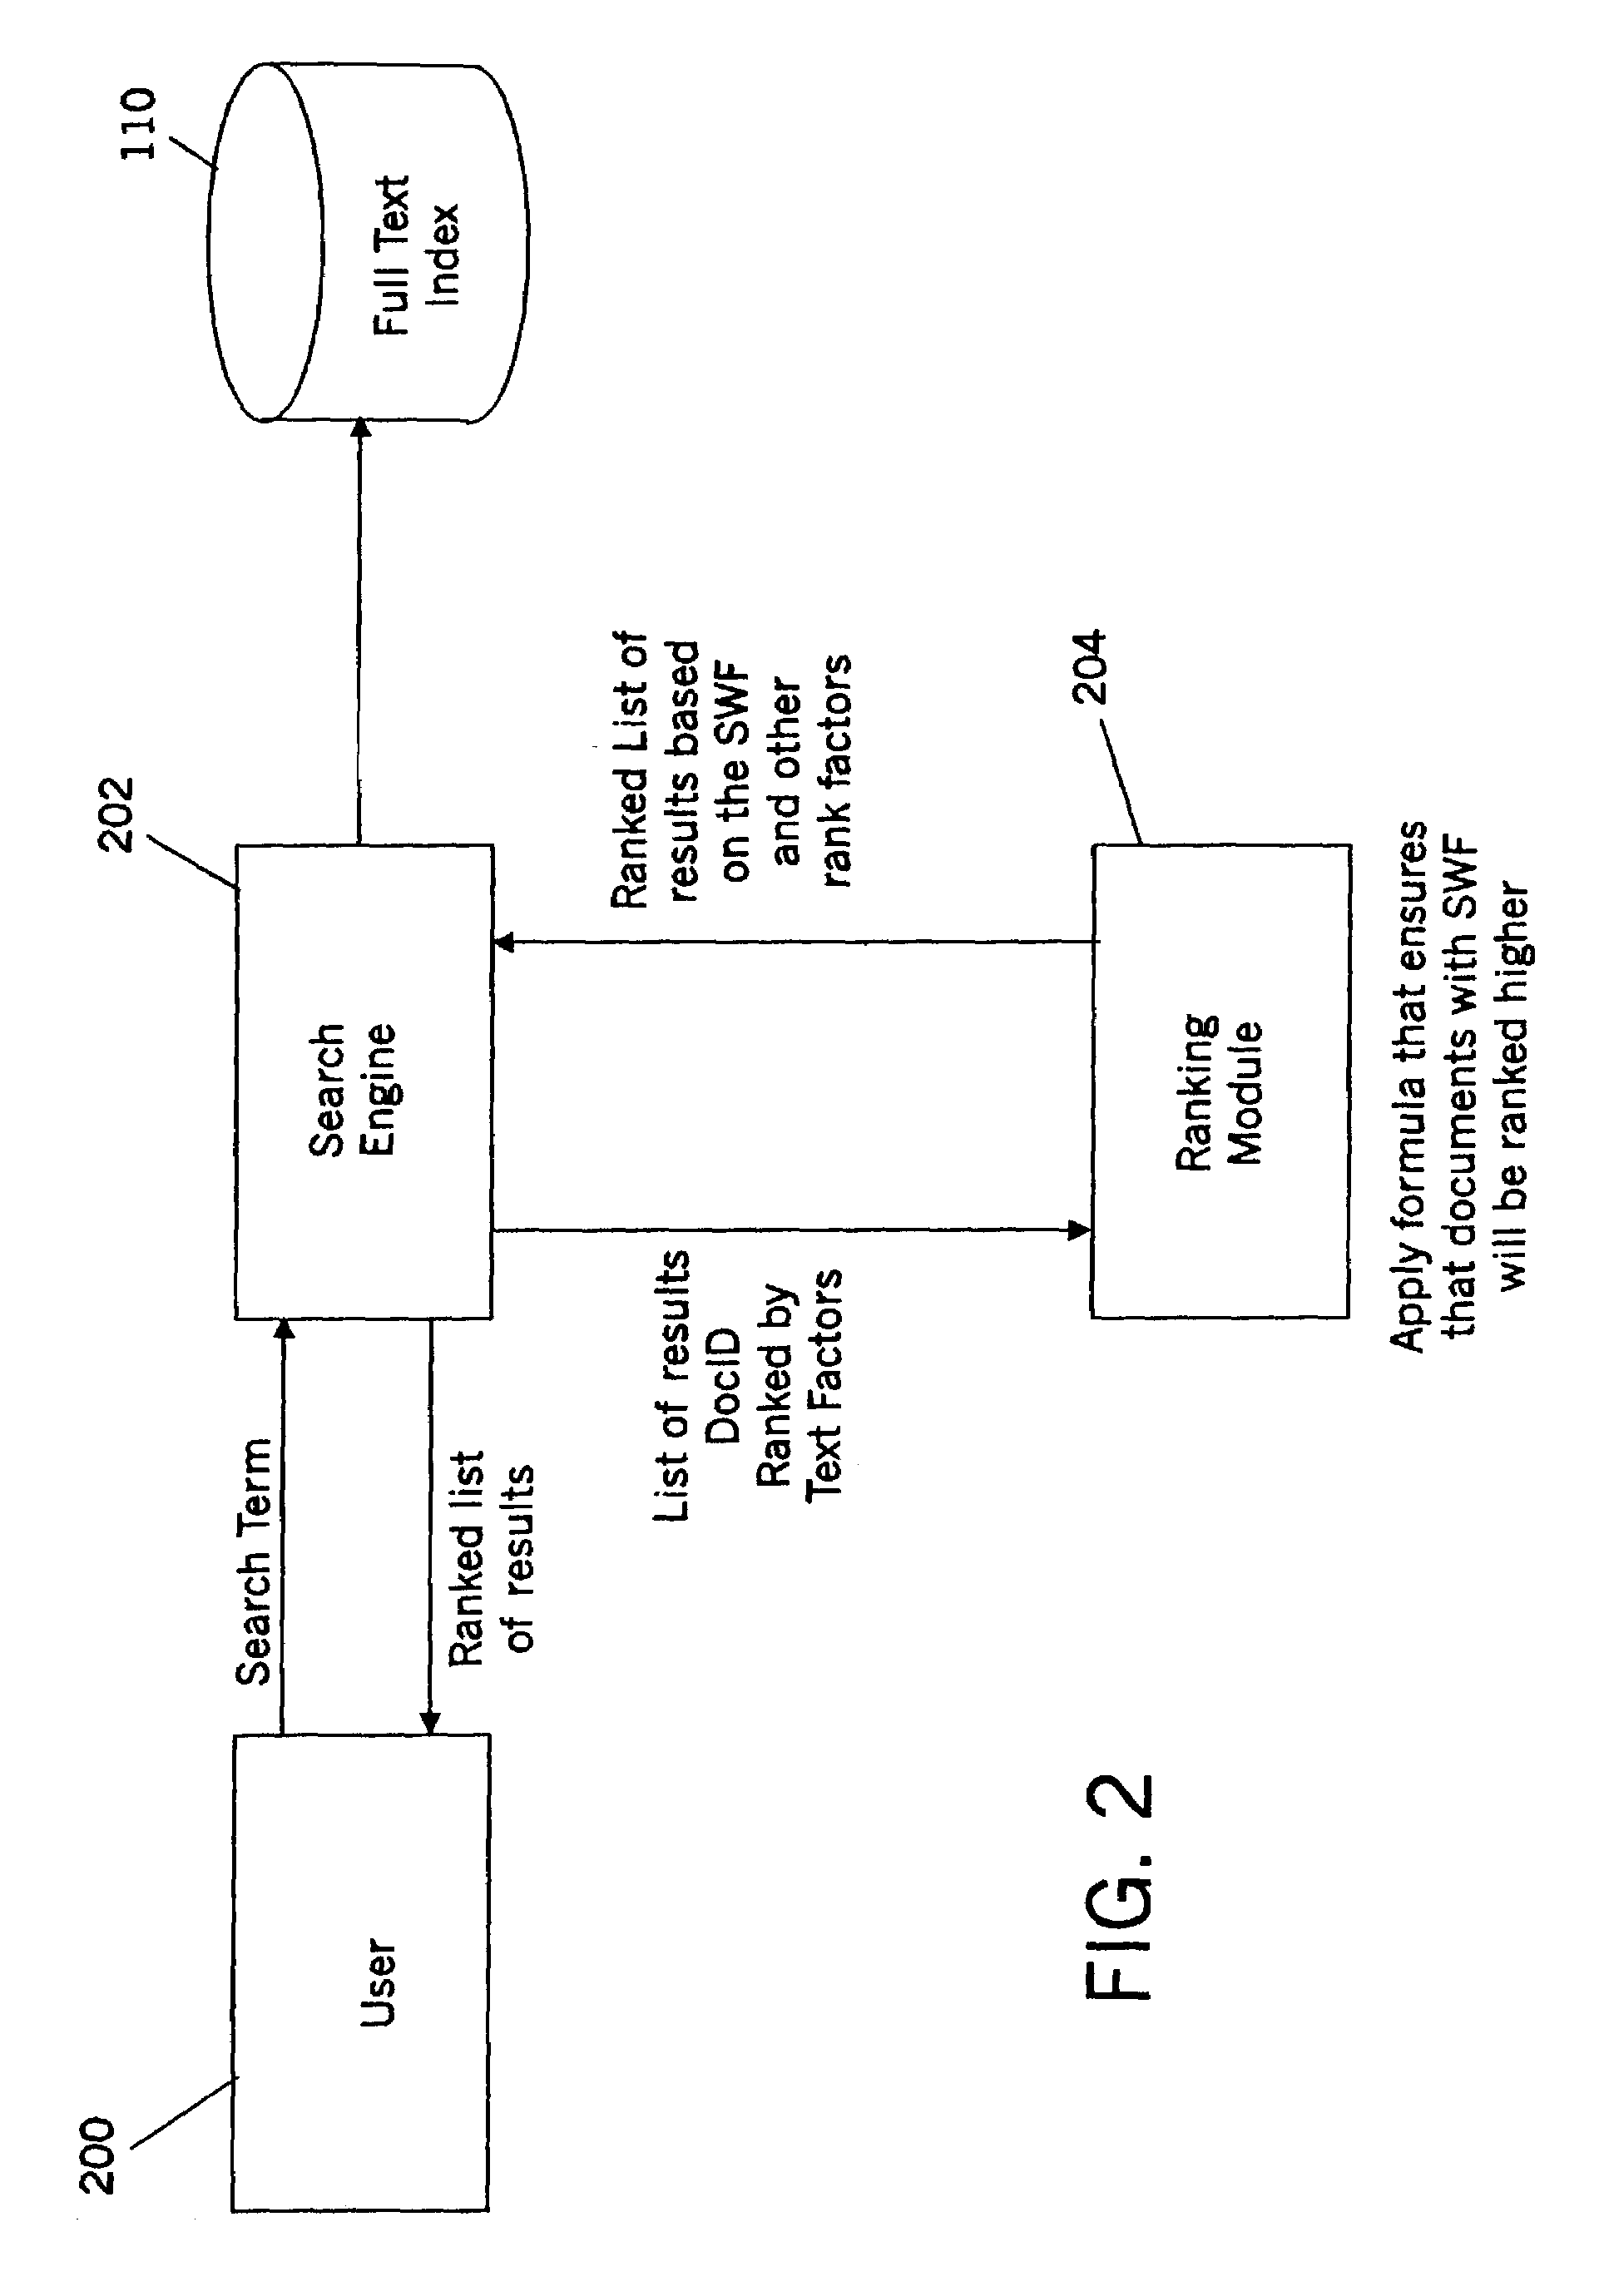 Method of promoting strategic documents by bias ranking of search results